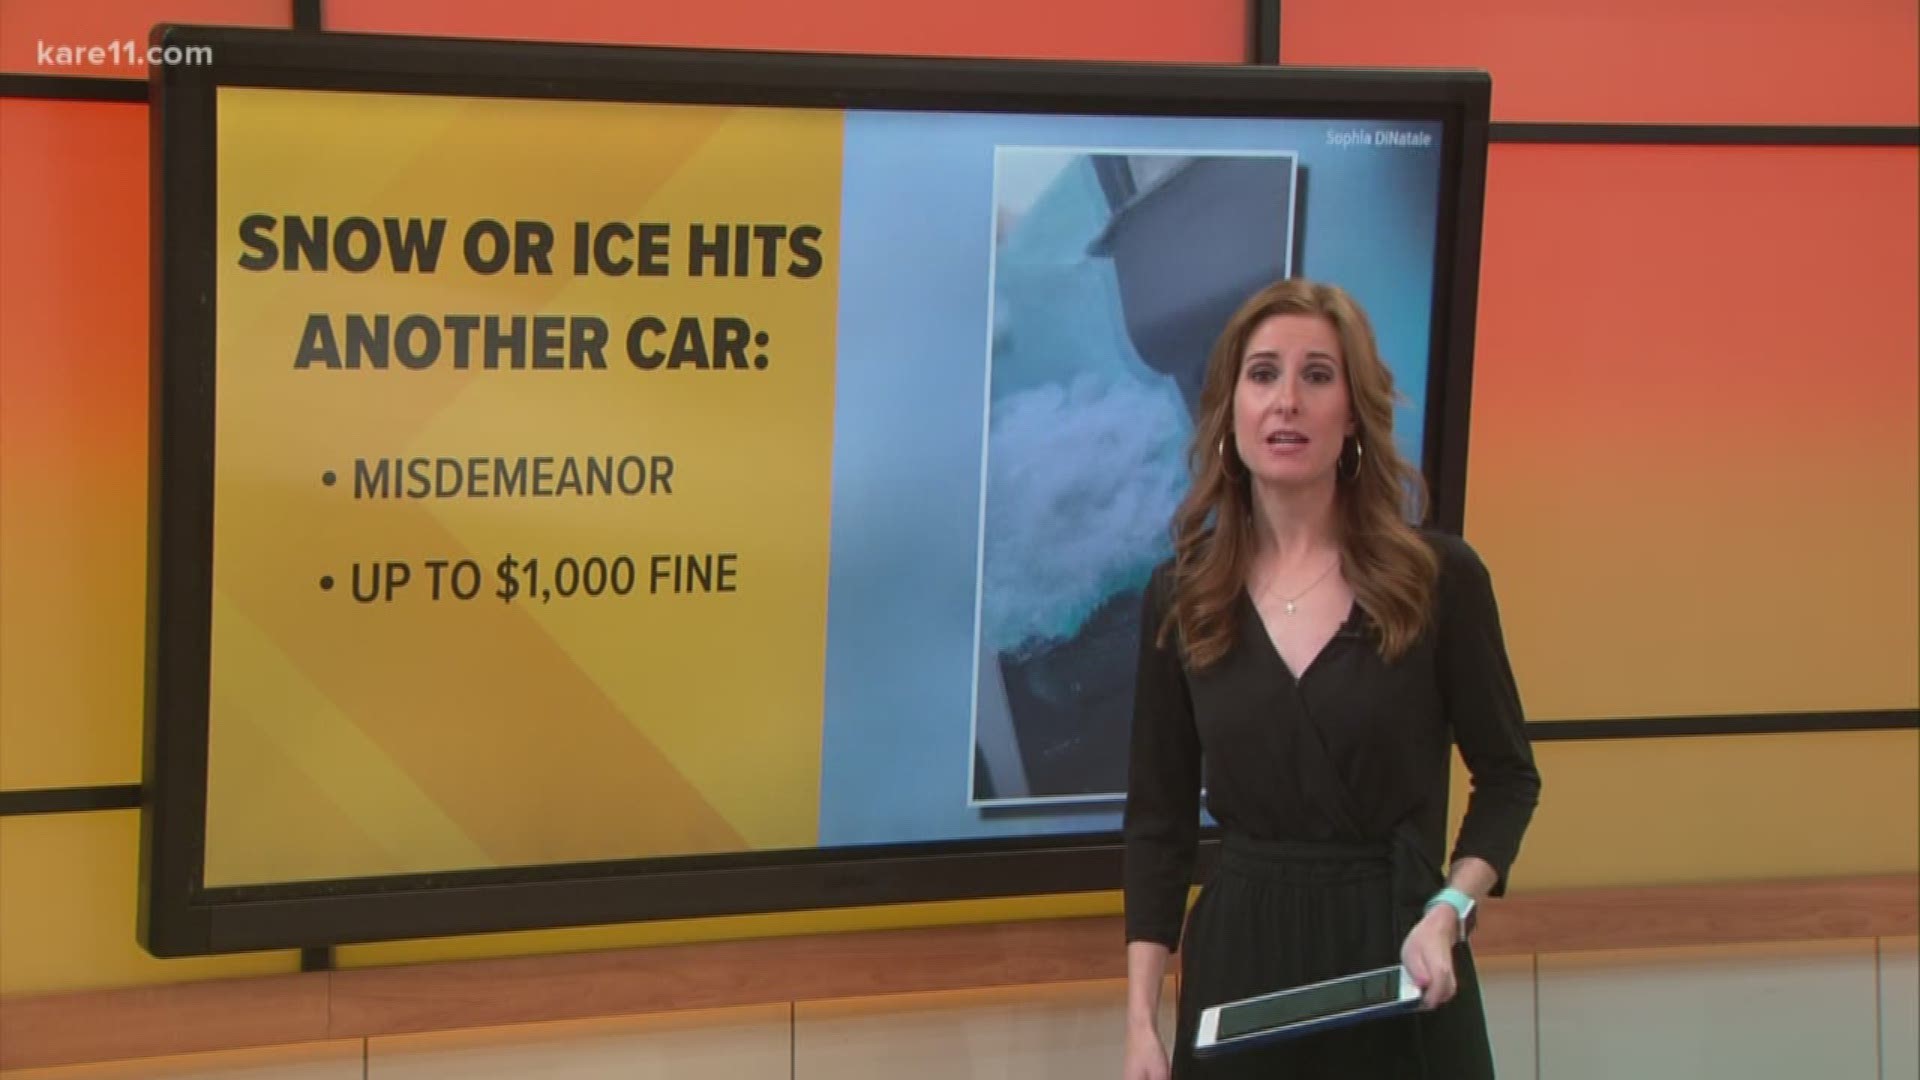 The ice chunk went into the woman's windshield and hit her in the face, but she managed to get out with only a couple scrapes and scratches.